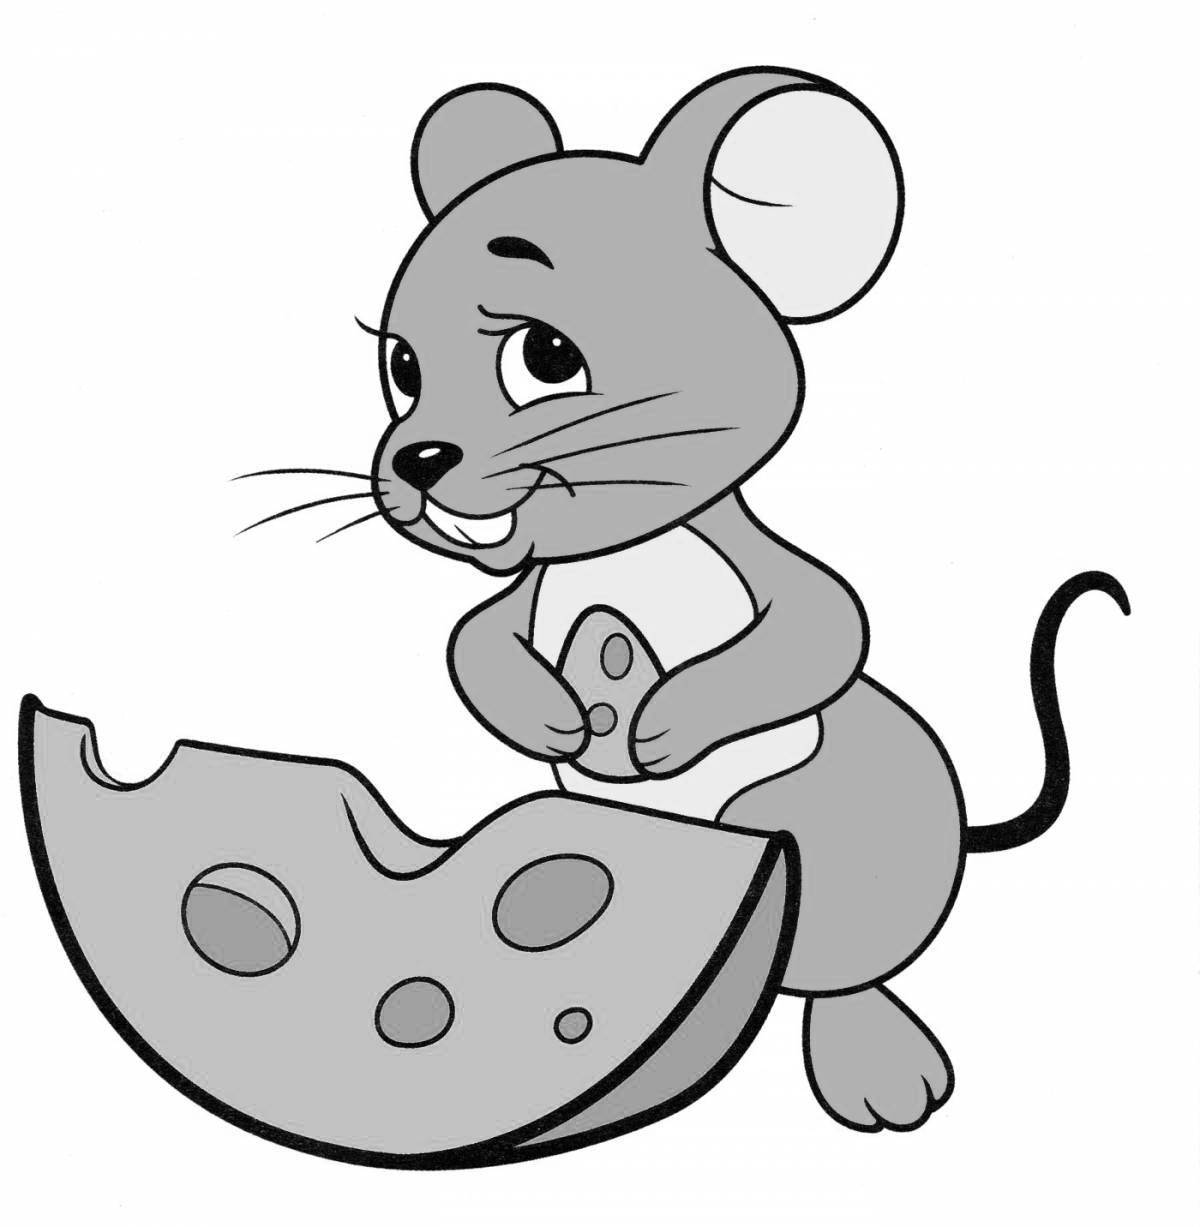 Joyful mouse with cheese coloring book